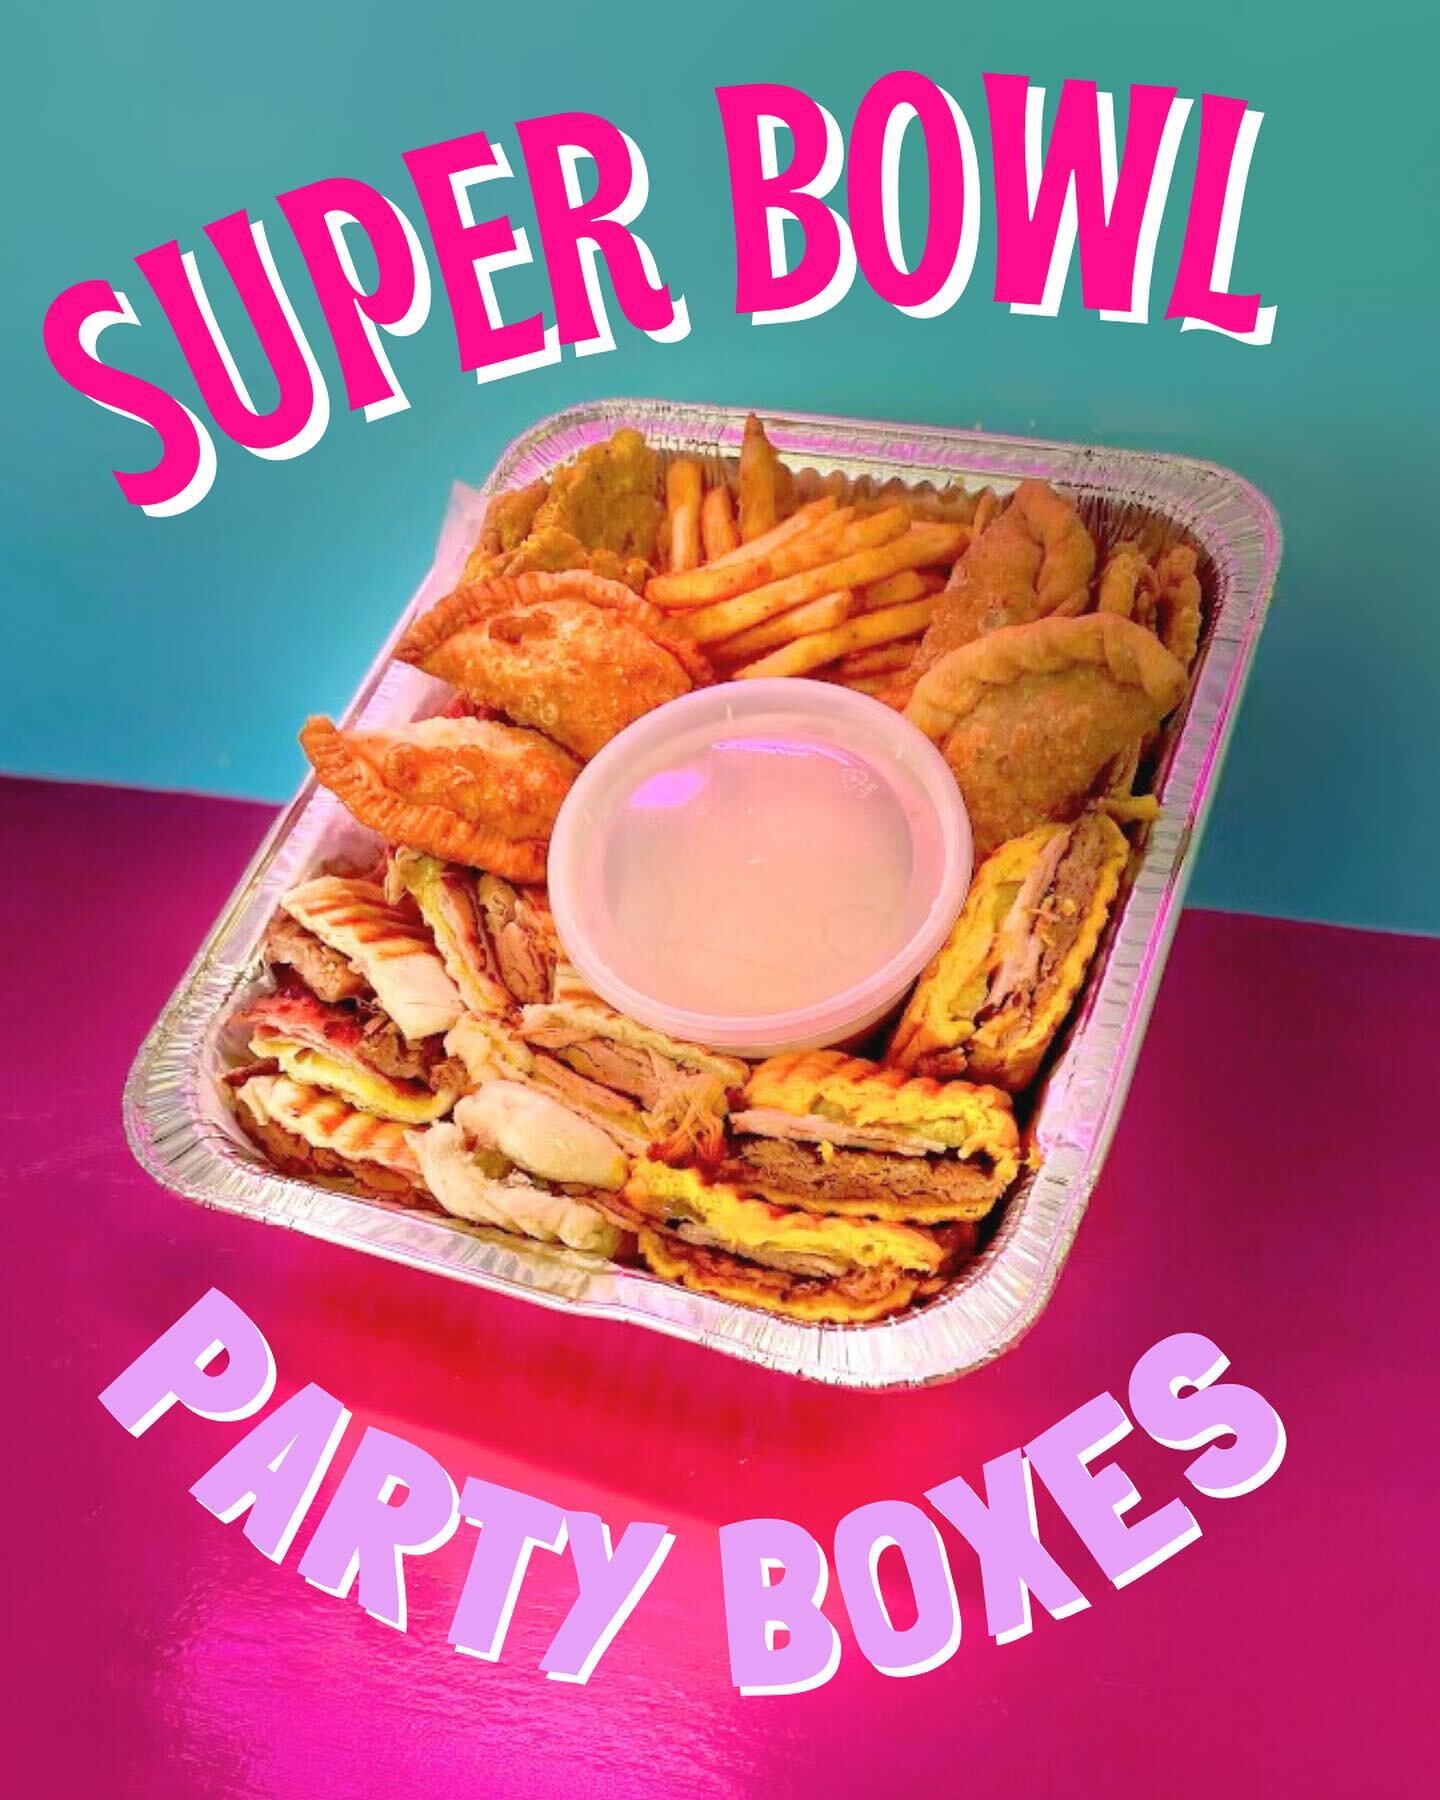 SUPER BOWL PARTY BOXES!

🏈&nbsp;4-5 Person Box $45

🏈&nbsp;7-8 Person Box $70

Go to our website and fill out the catering form to order!!

#savannaheatz #savannaheats #savannahcoffee #savannahbreakfast #savannahlunch #savannahga #visitsavannah #wh